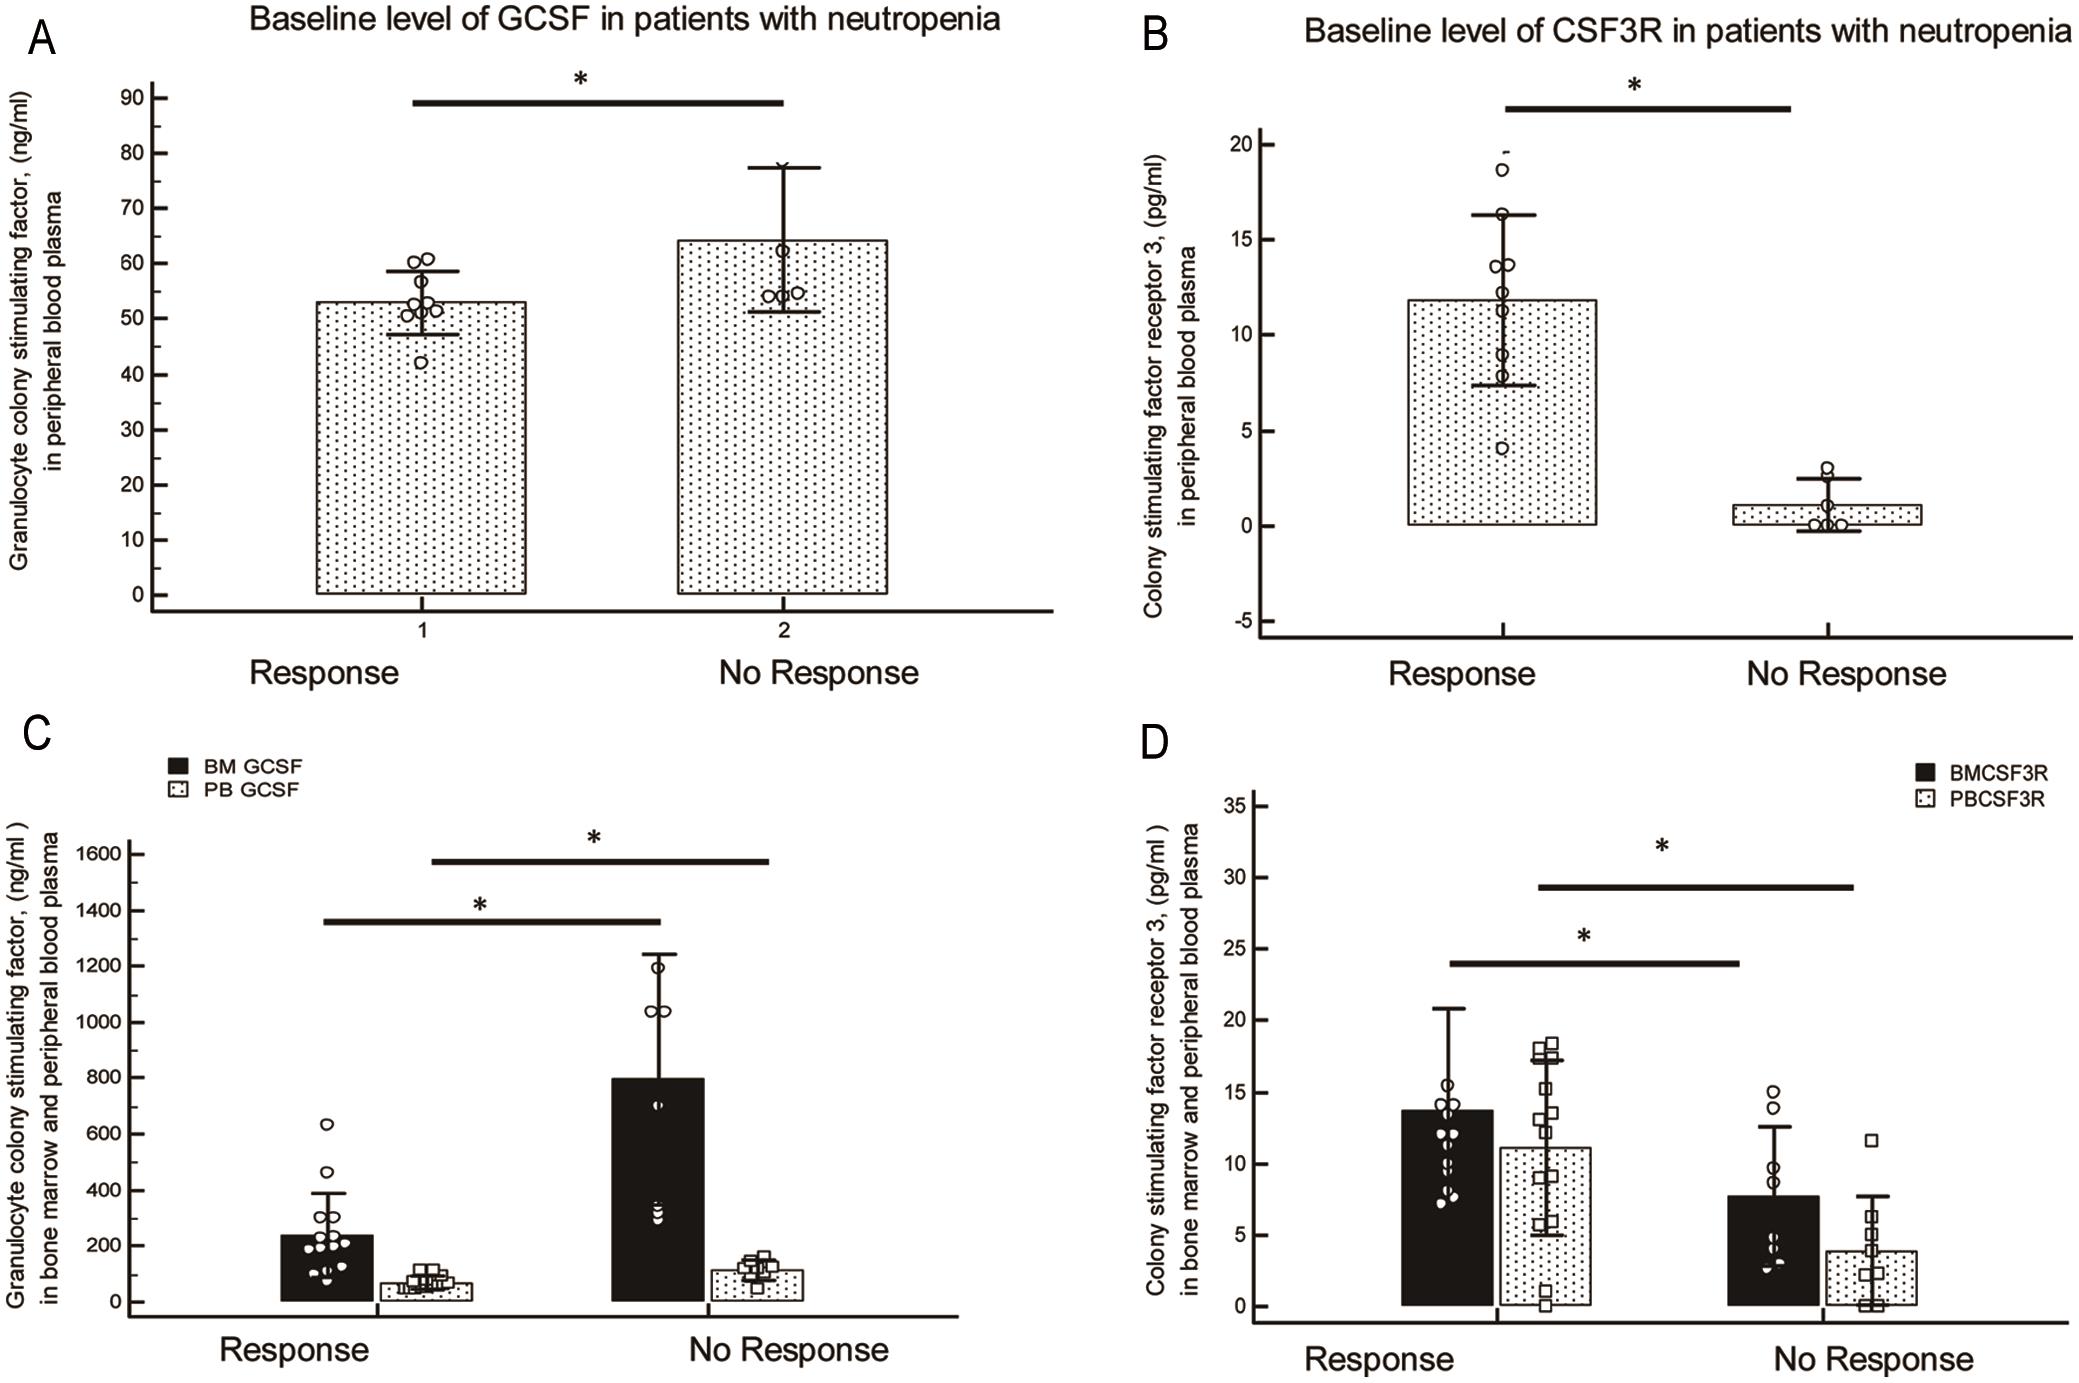 Association of Colony-stimulating factor receptor (CSF3R) with neutropenia and infection.